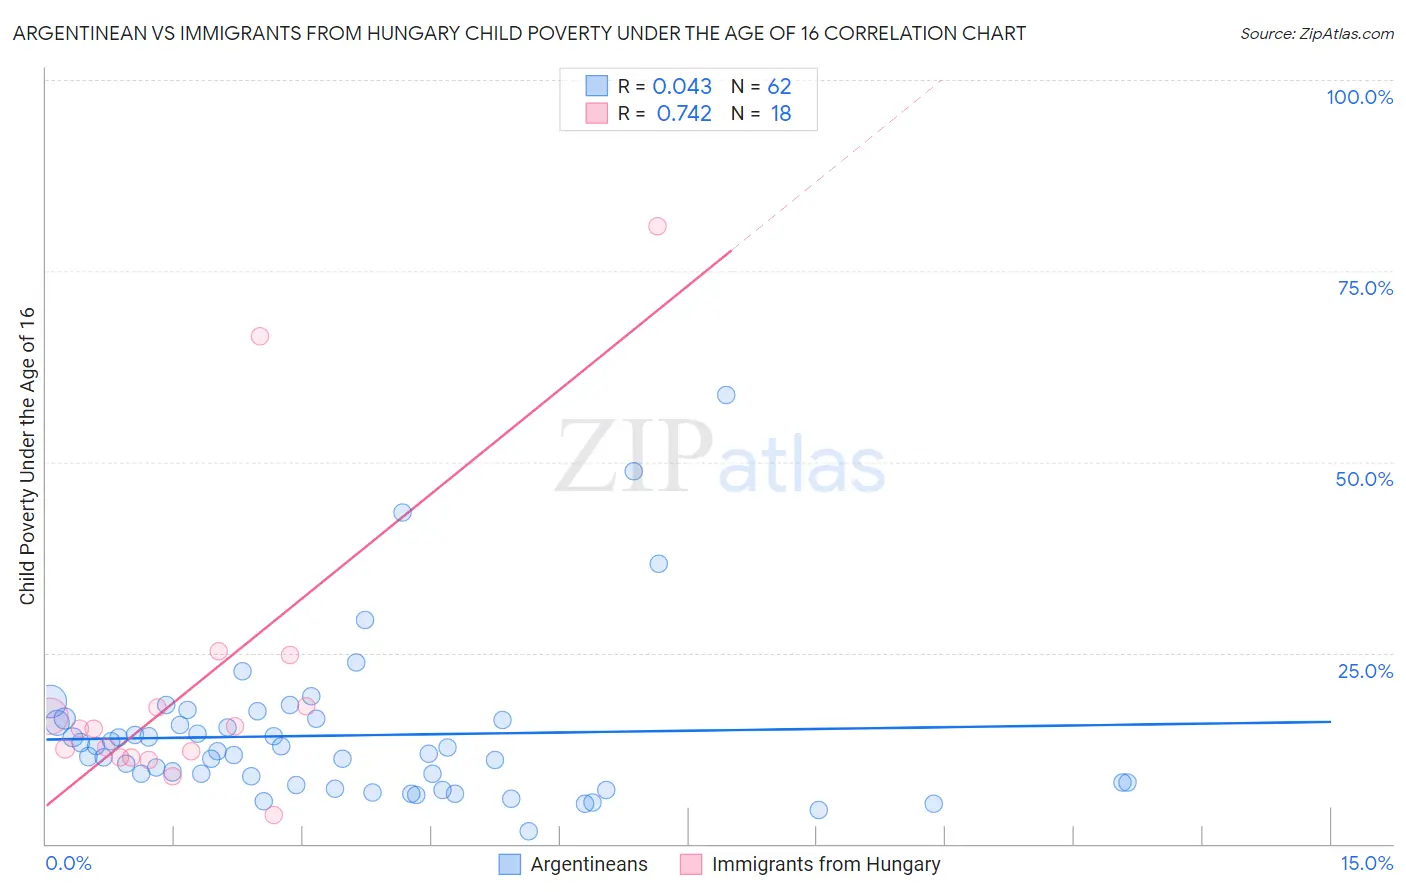 Argentinean vs Immigrants from Hungary Child Poverty Under the Age of 16